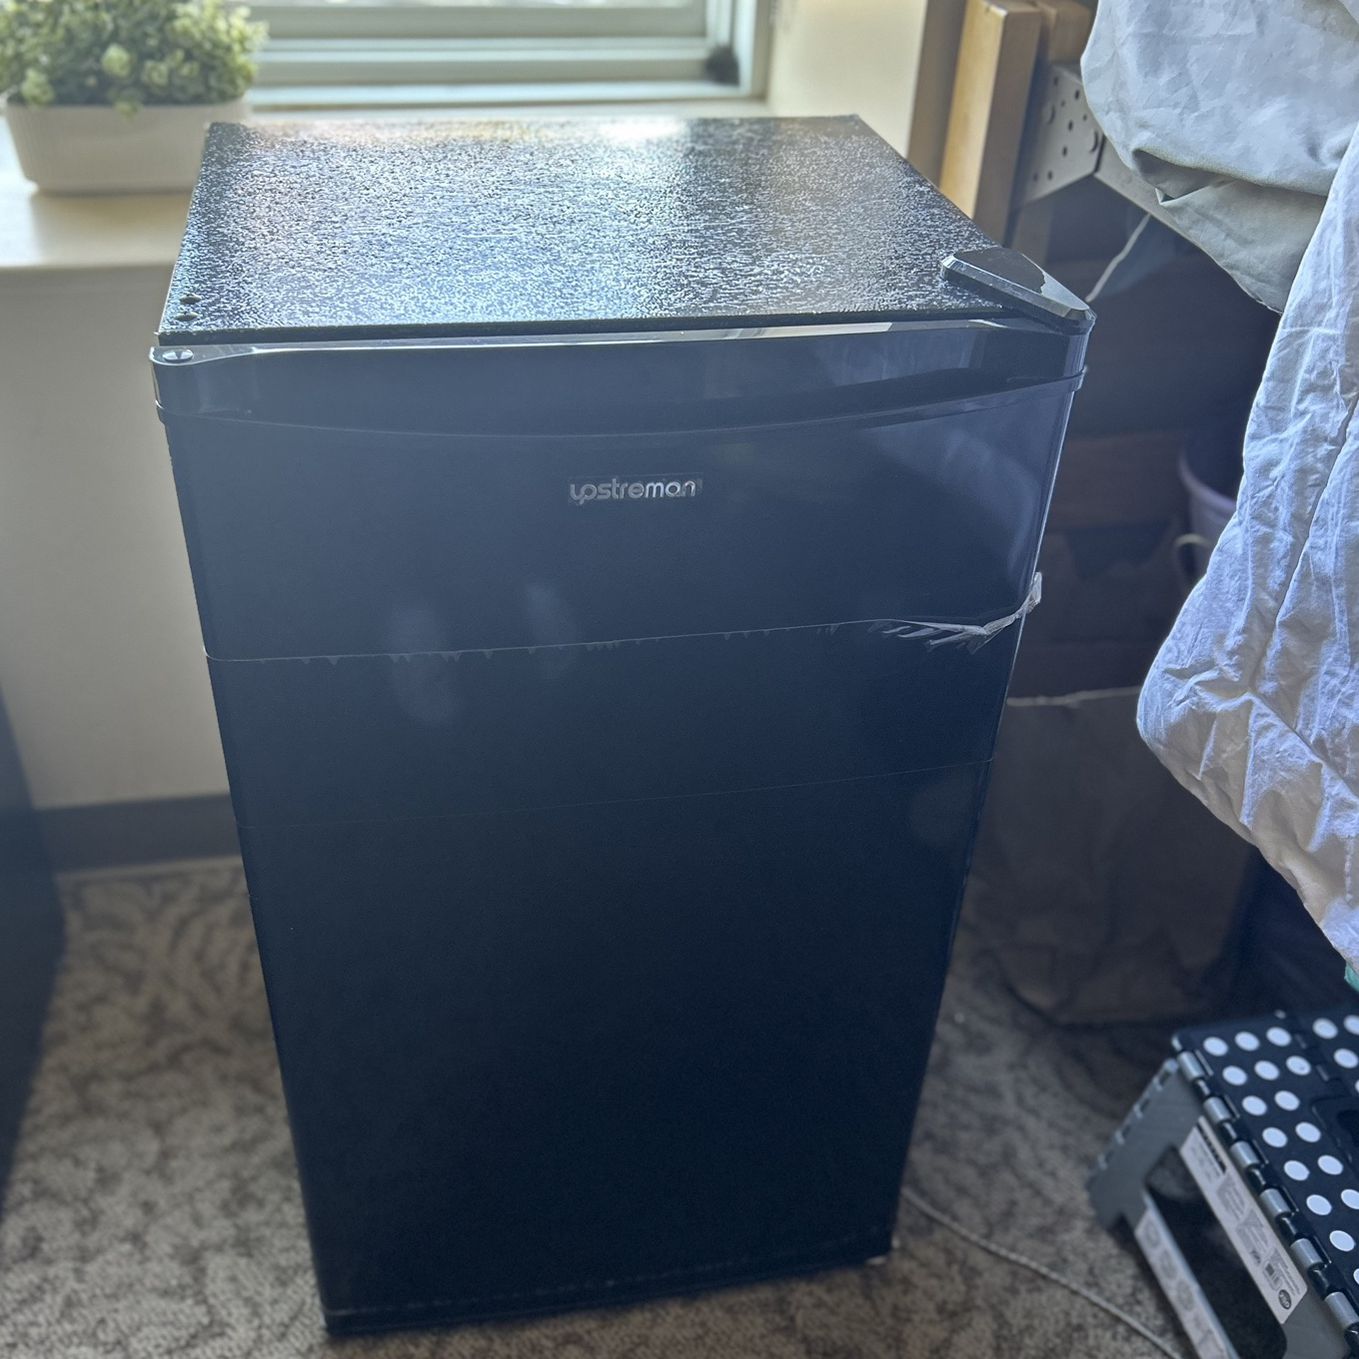 Used In Great Condition - (PICKUP ONLY) Upstream 3.2 Cubic Ft. Mini Fridge W/Freezer